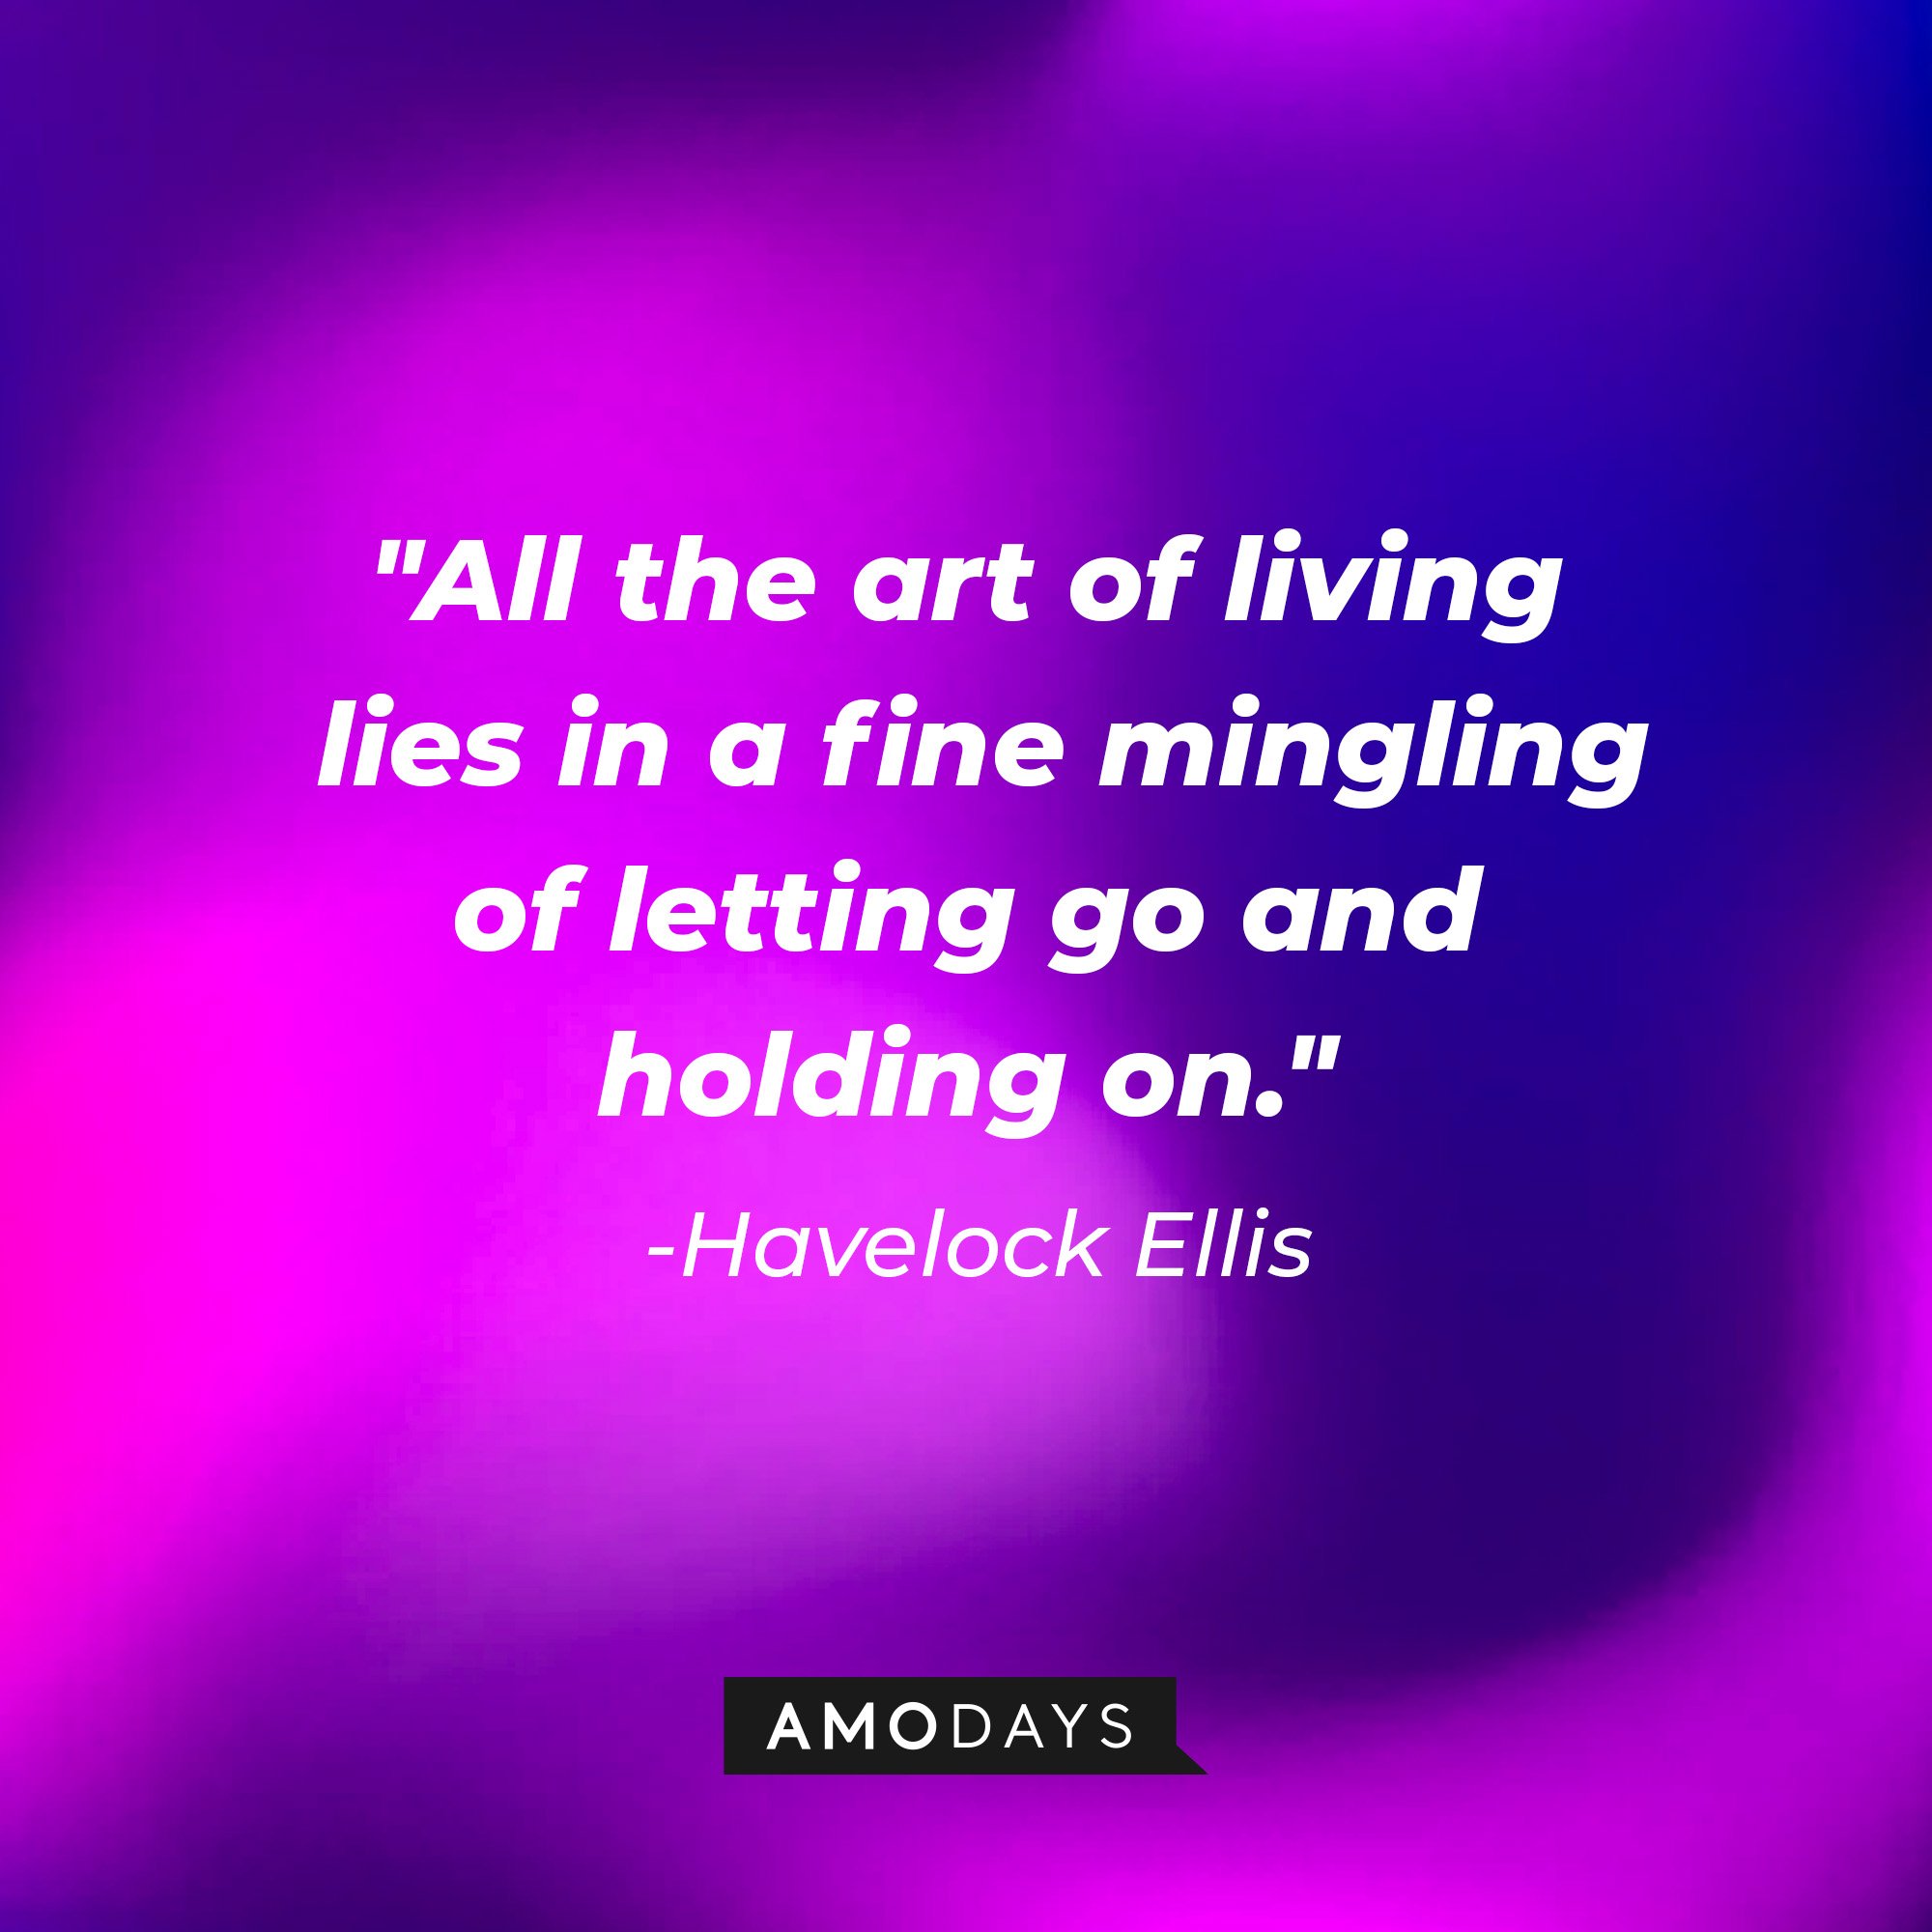  Havelock Ellis' quote: "All the art of living lies in a fine mingling of letting go and holding on."  | Image: AmoDays